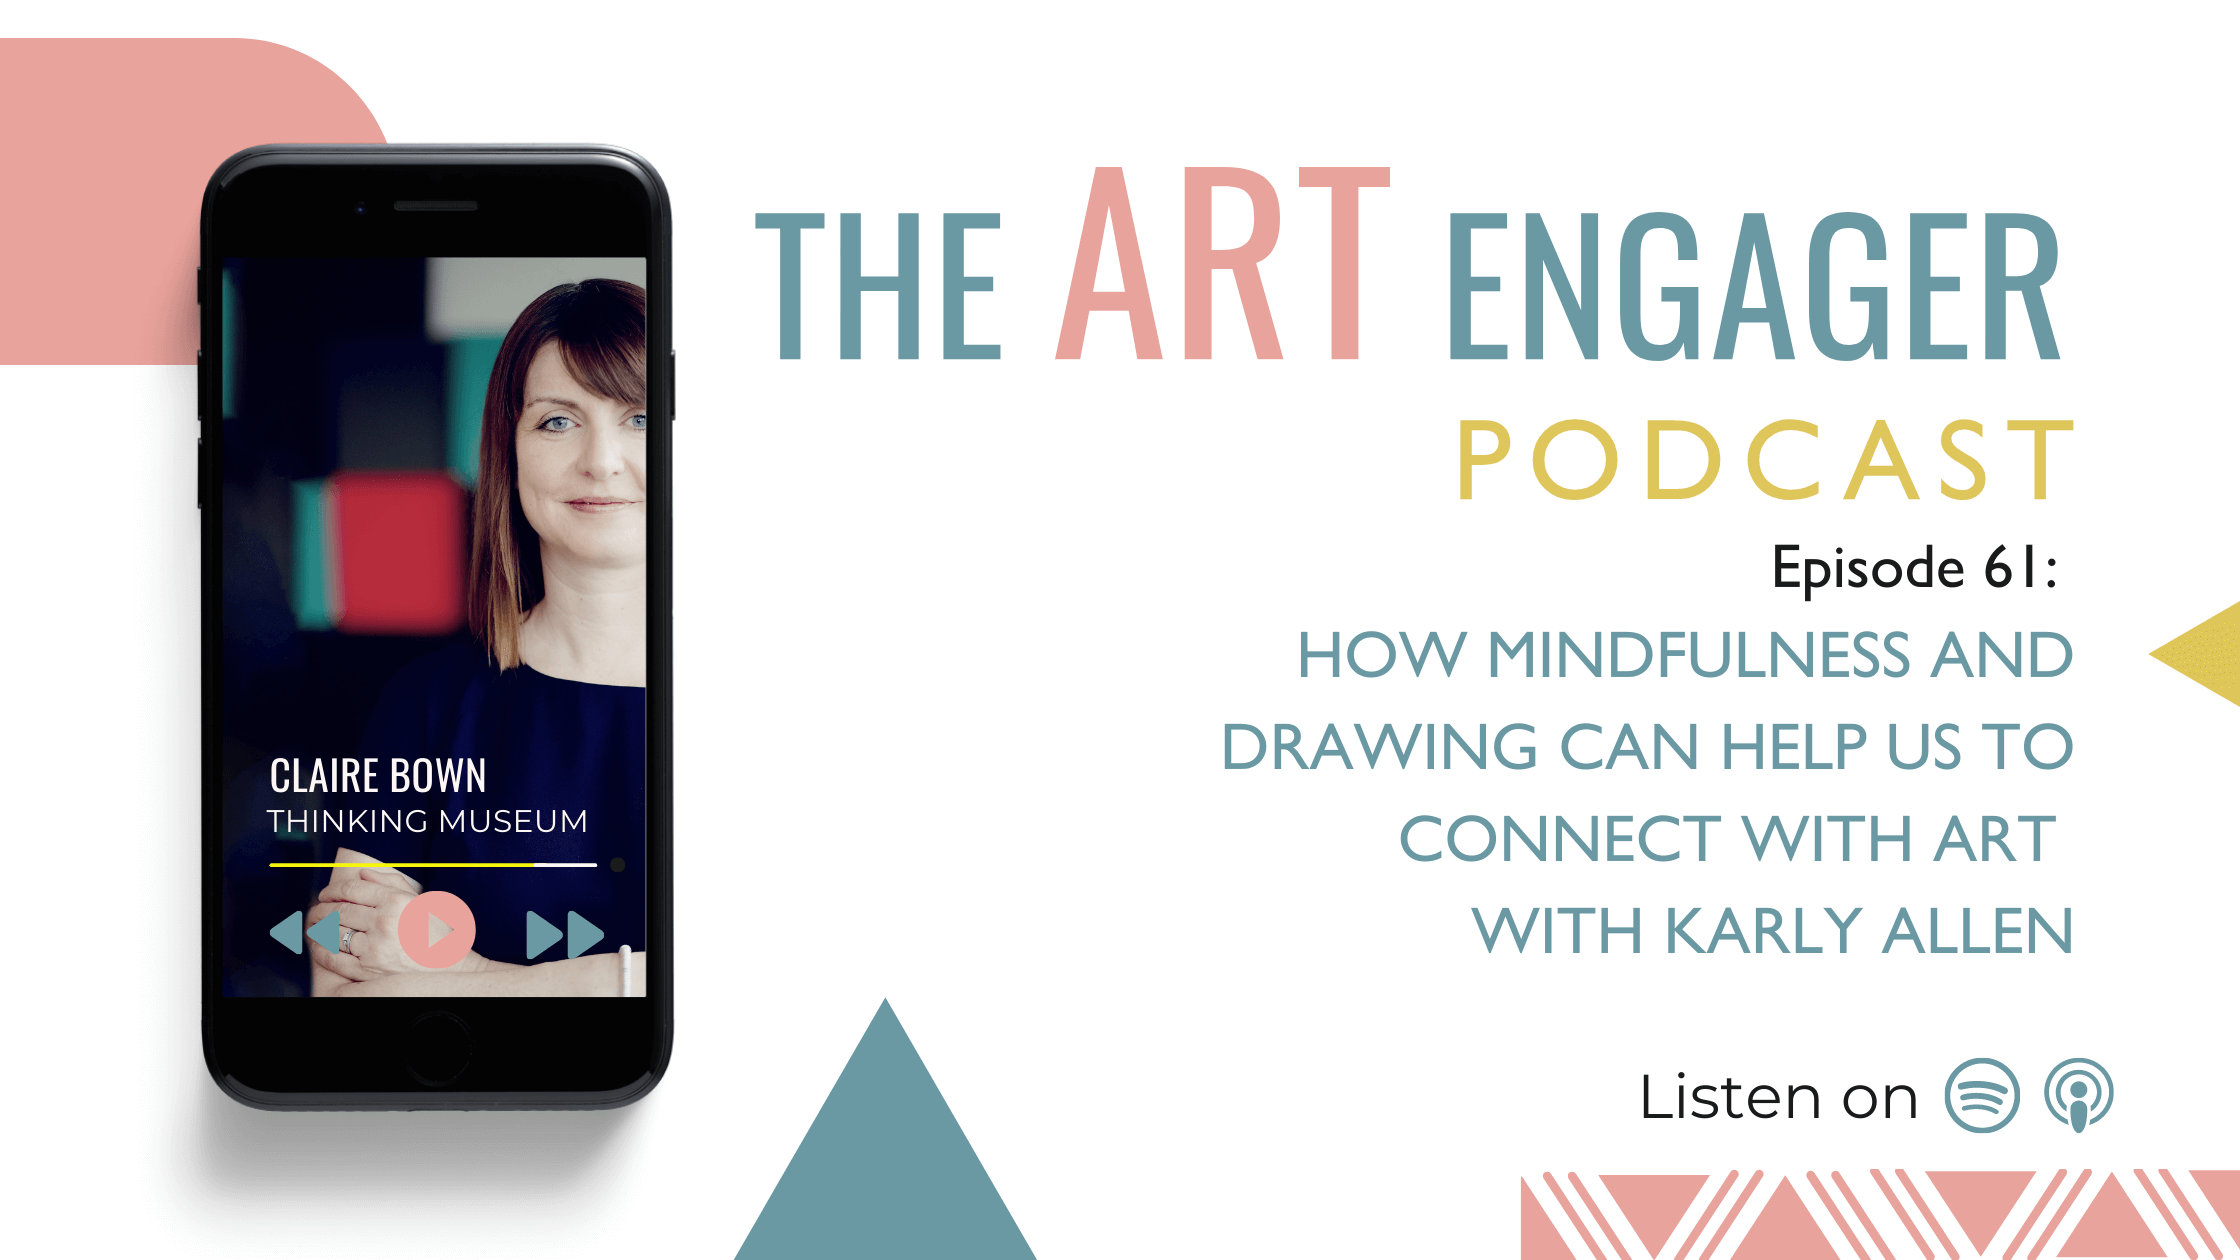 THE ART ENGAGER PODCAST EPISODE 61 HOW MINDFULNESS AND DRAWING HELP US TO CONNECT WITH ART WITH KARLY ALLEN